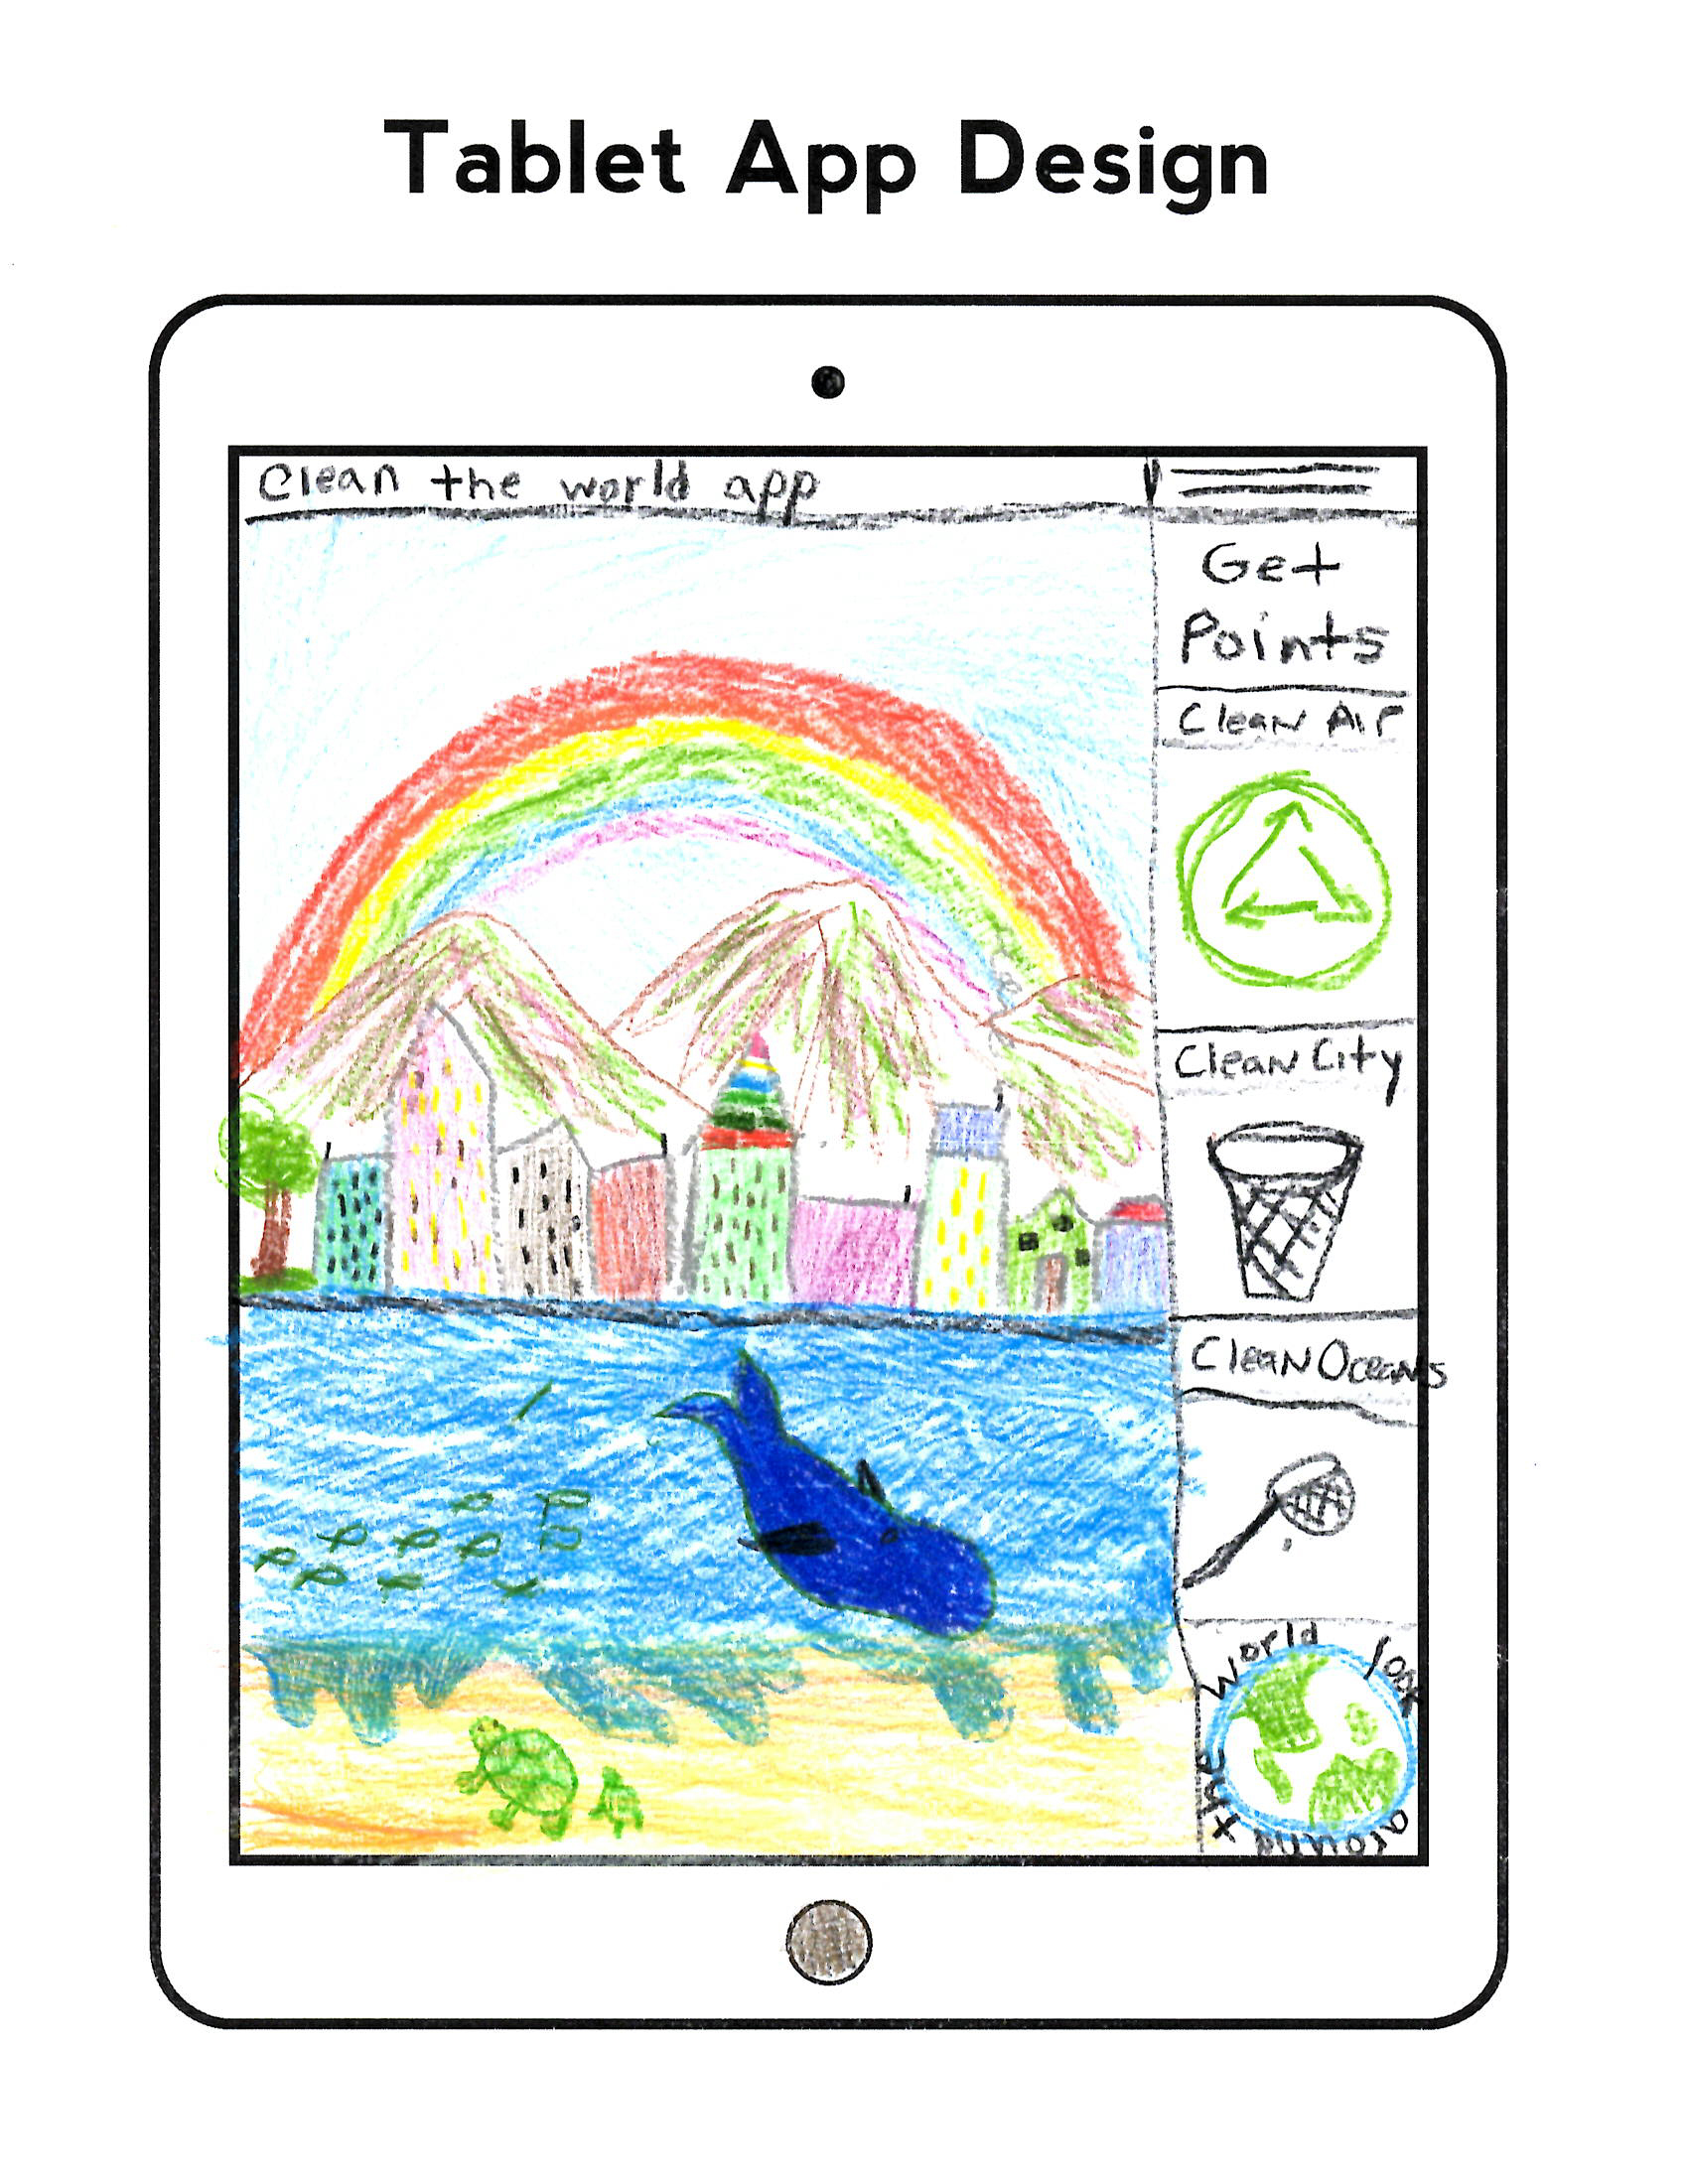 Tablet app design with drawing